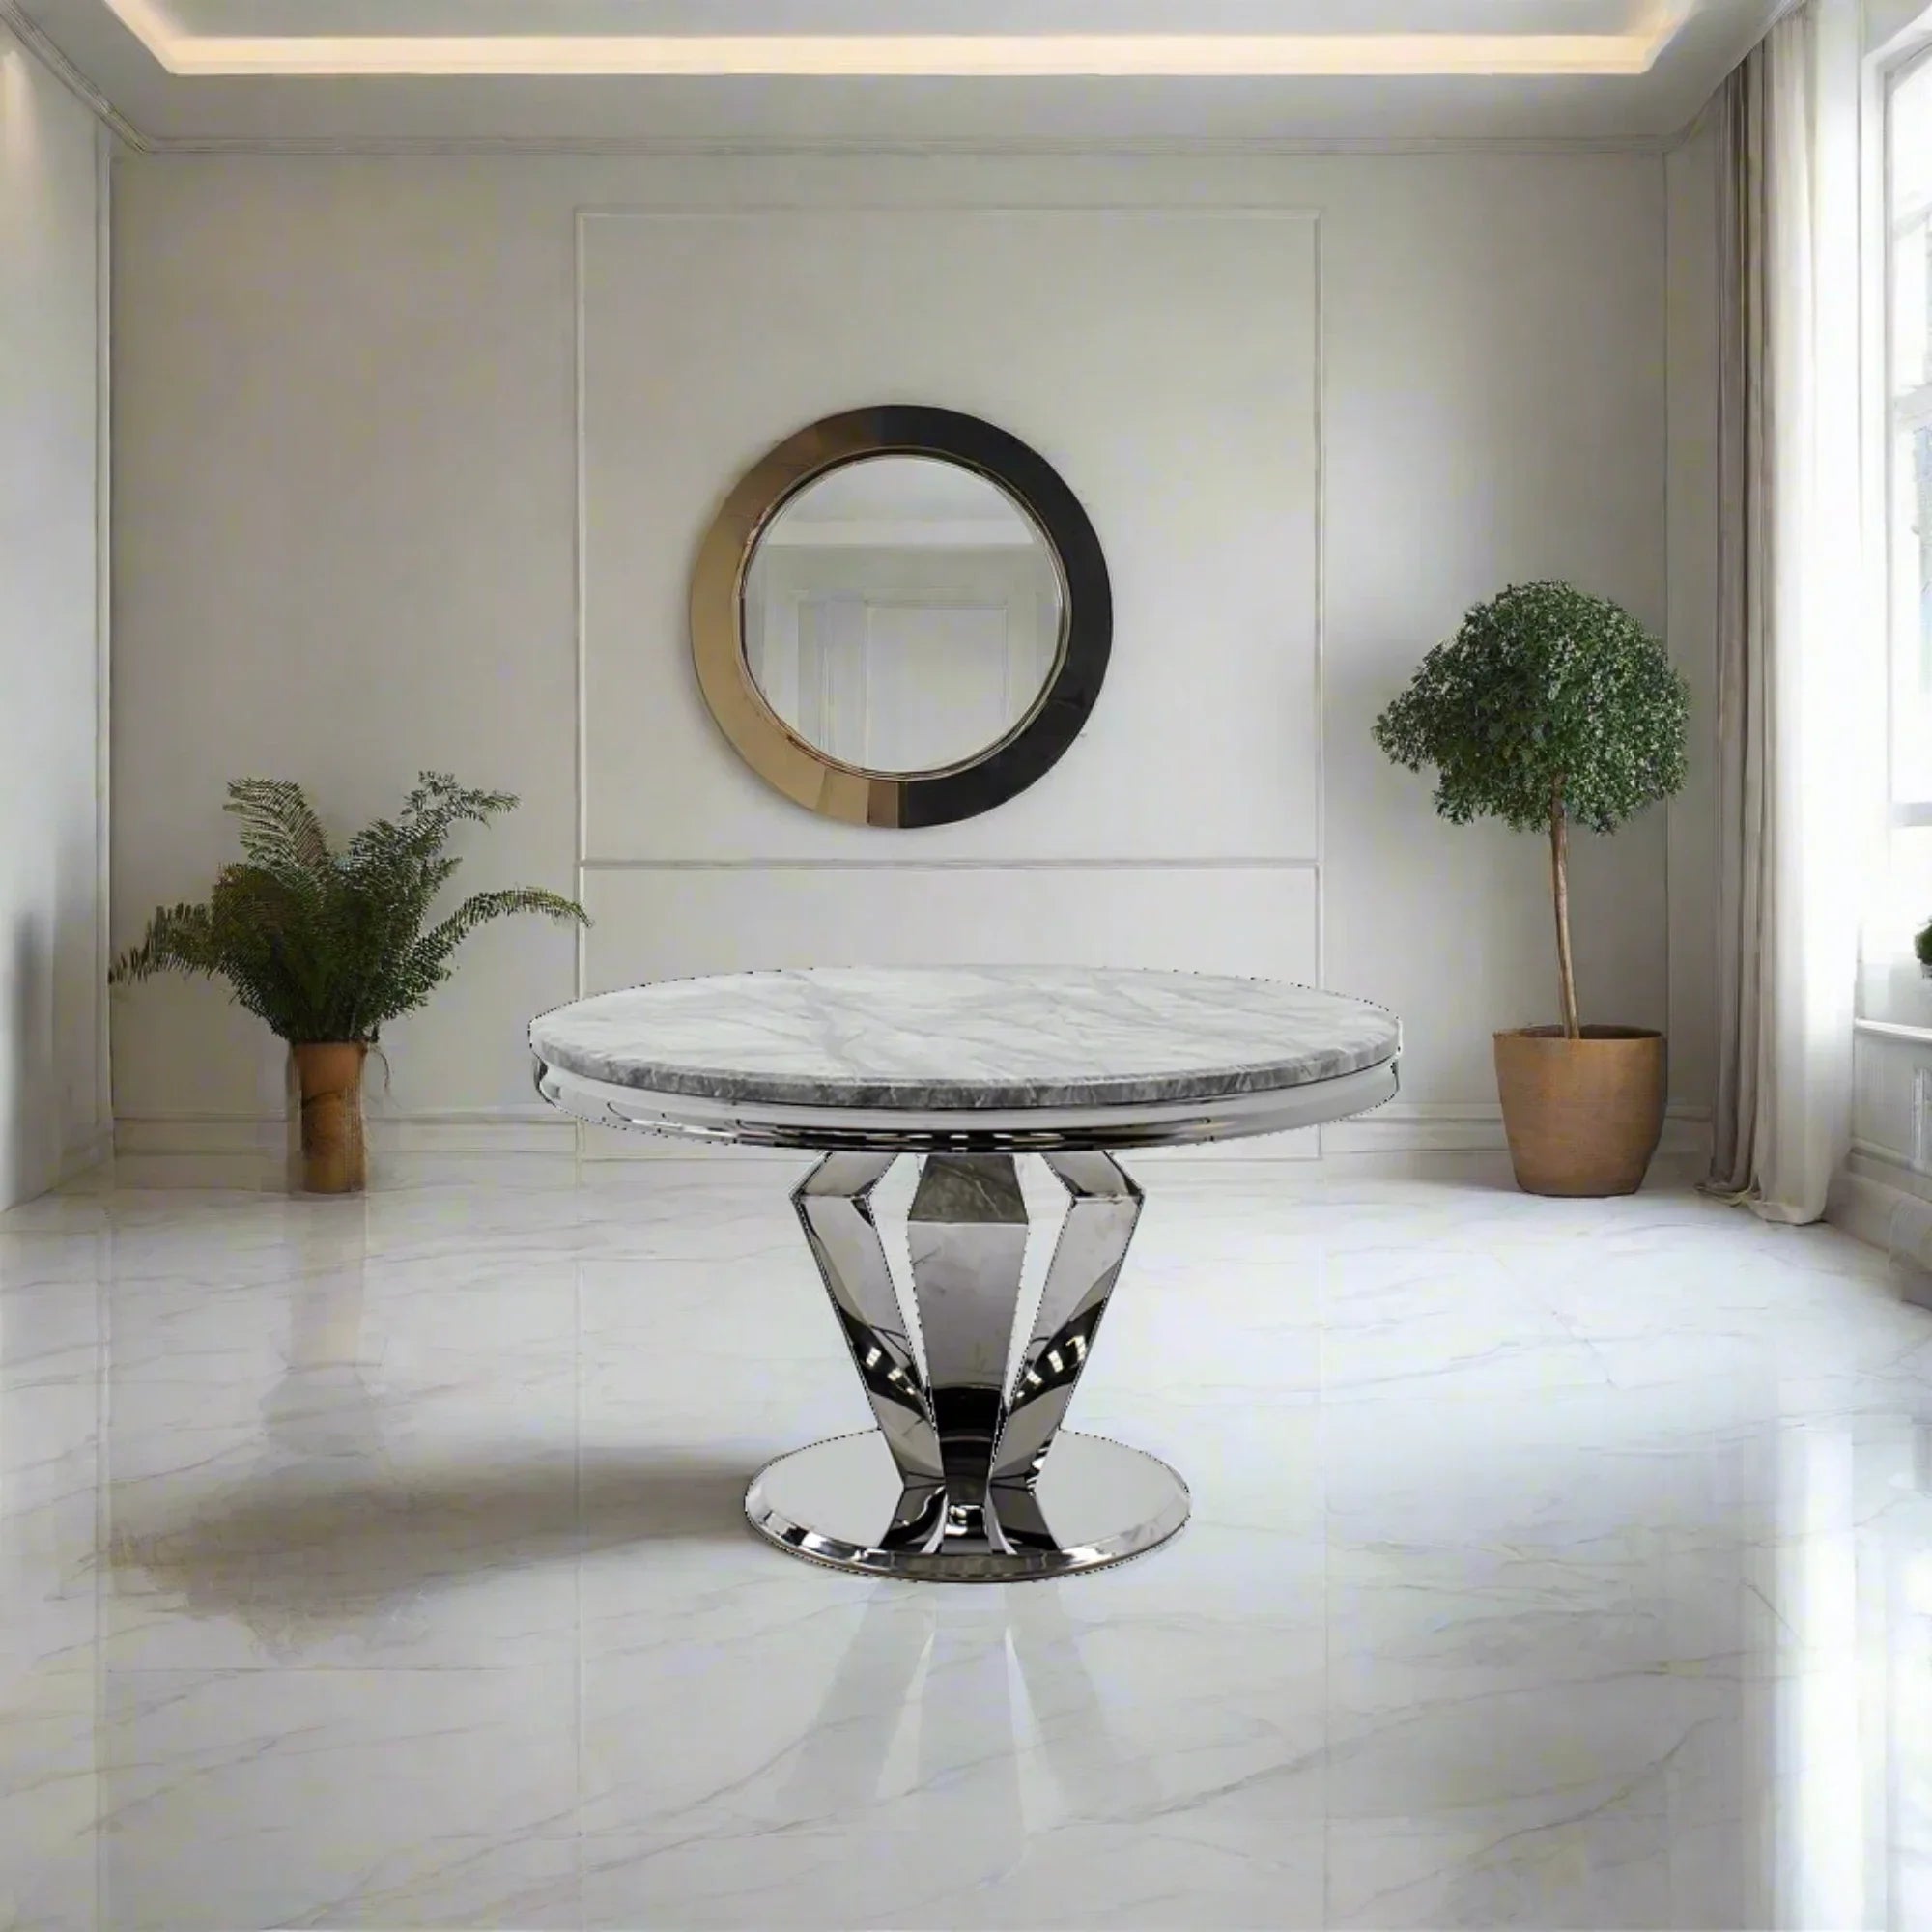 Vida Living Arturo Round Marble Dining Table with 4 Belvedere Chairs